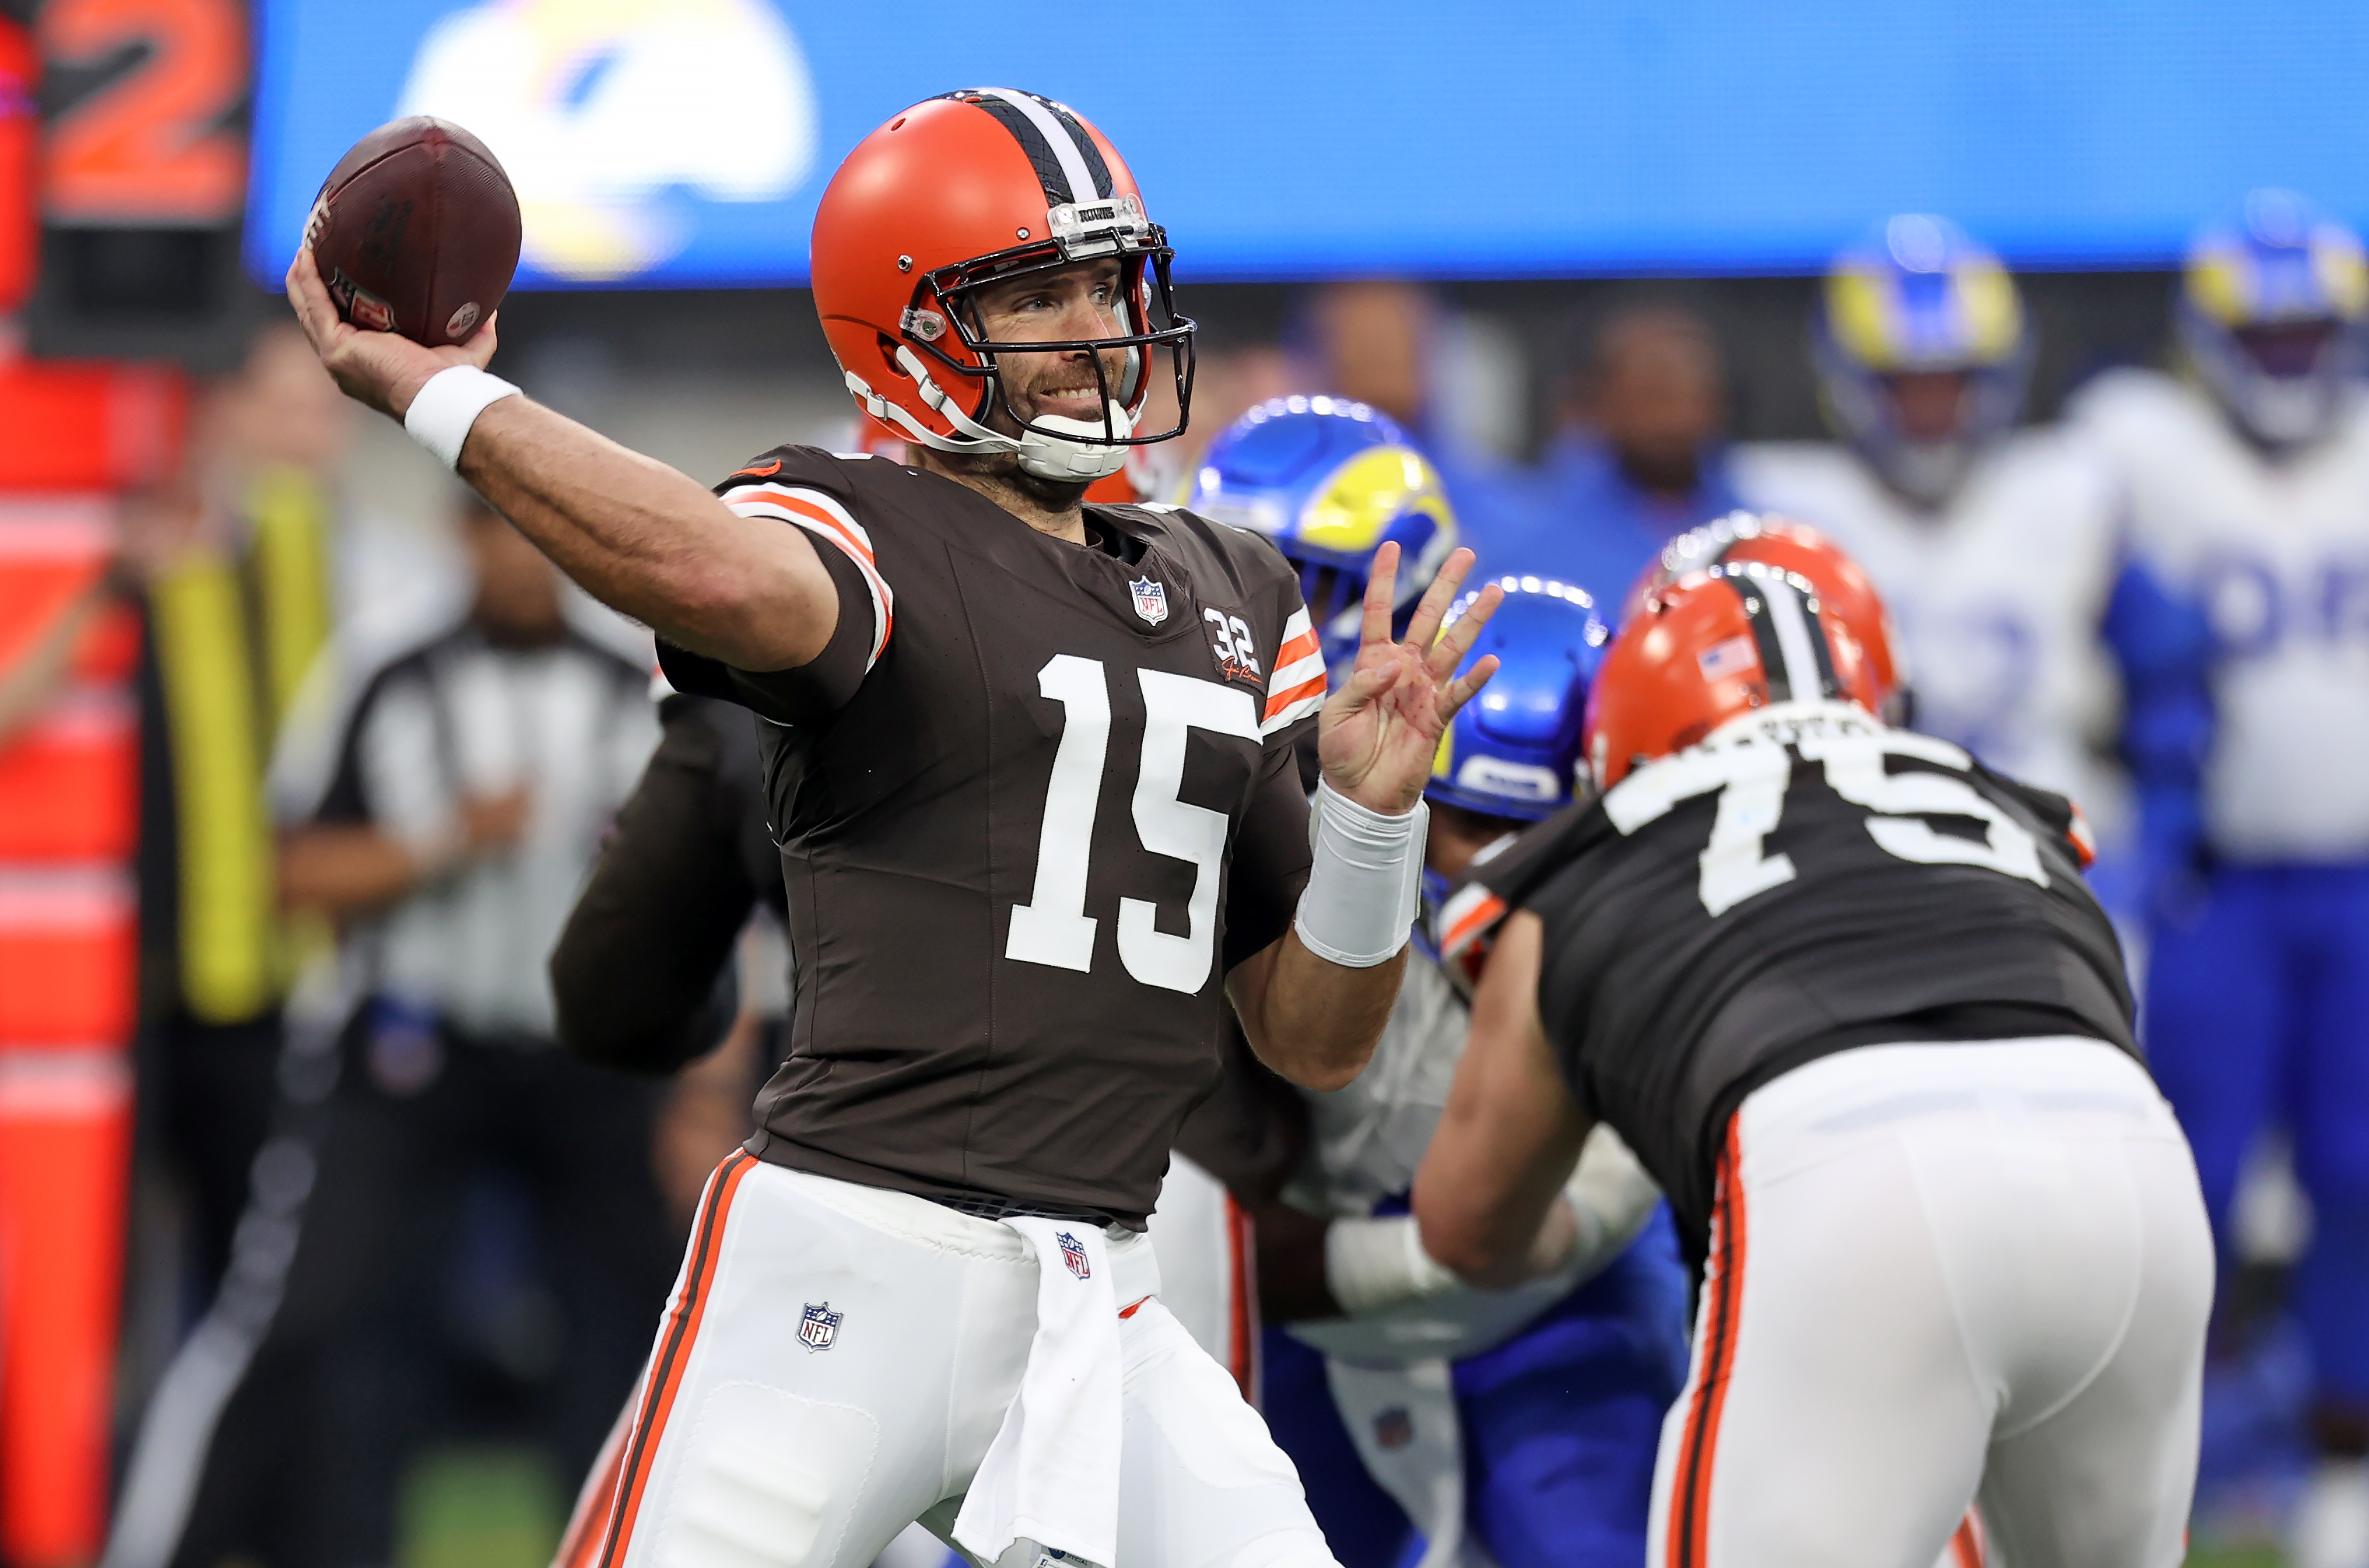 Cleveland Browns to host 8 free, open practices for fans